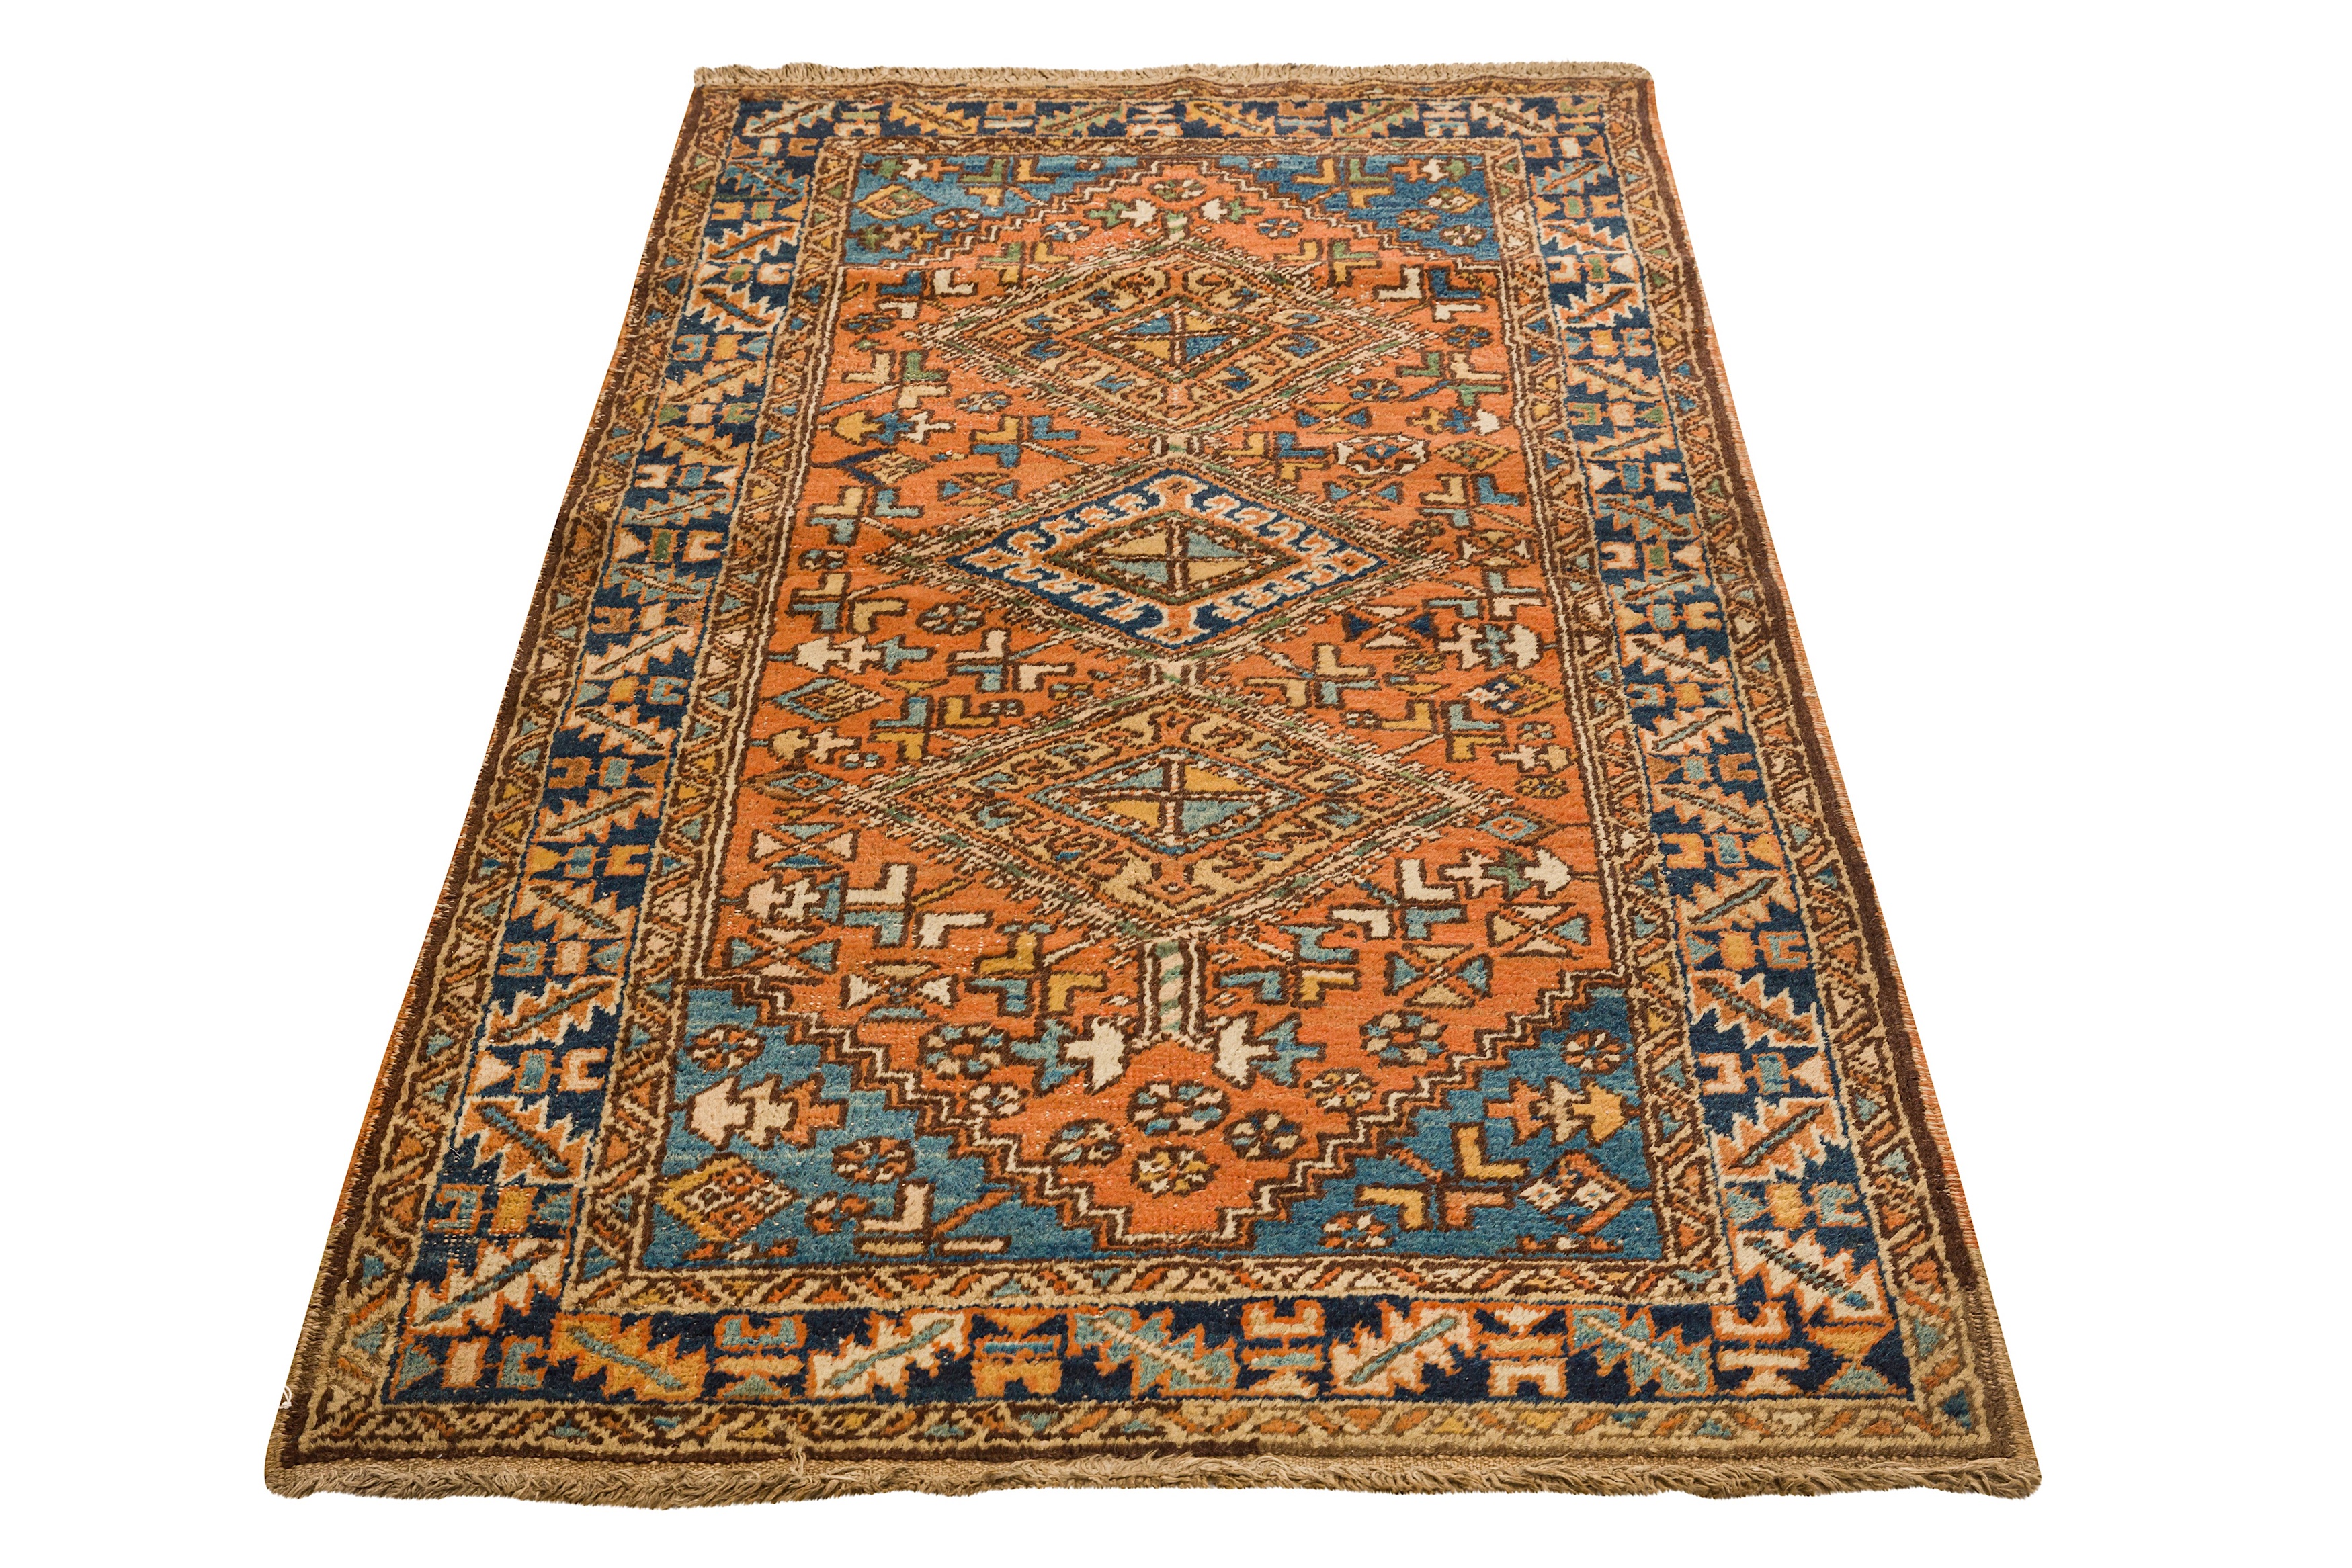 AN ANTIQUE HERIZ RUG, NORTH-WEST PERSIA - Image 2 of 8